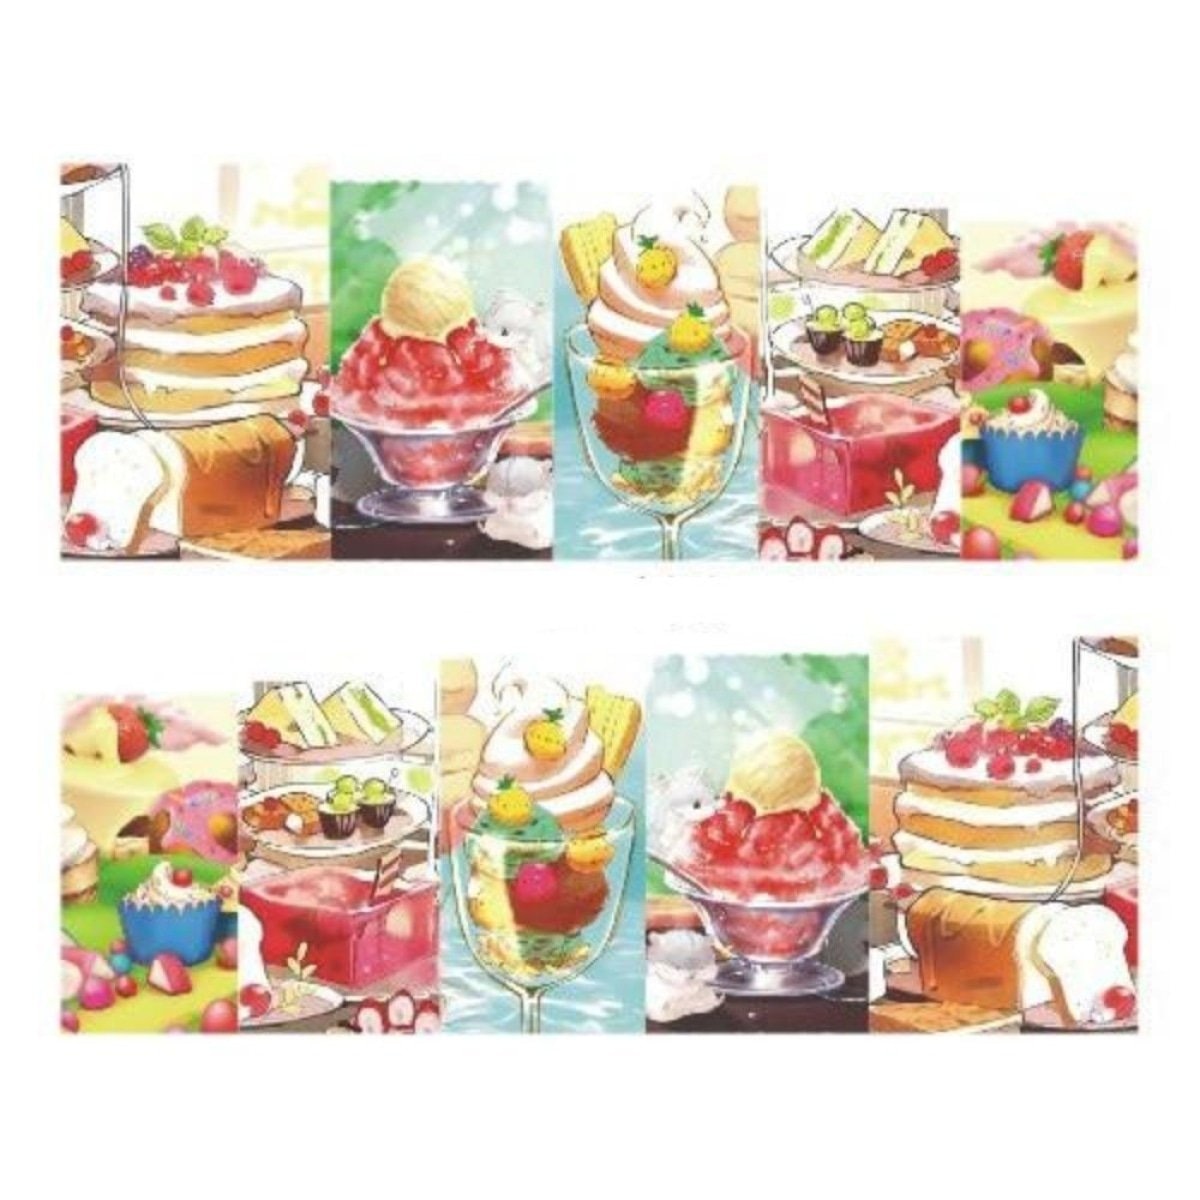 Strawberry Summer Cake & Fruit Stickers For Nails Nail Manicure Art Stz-486 - Sheet